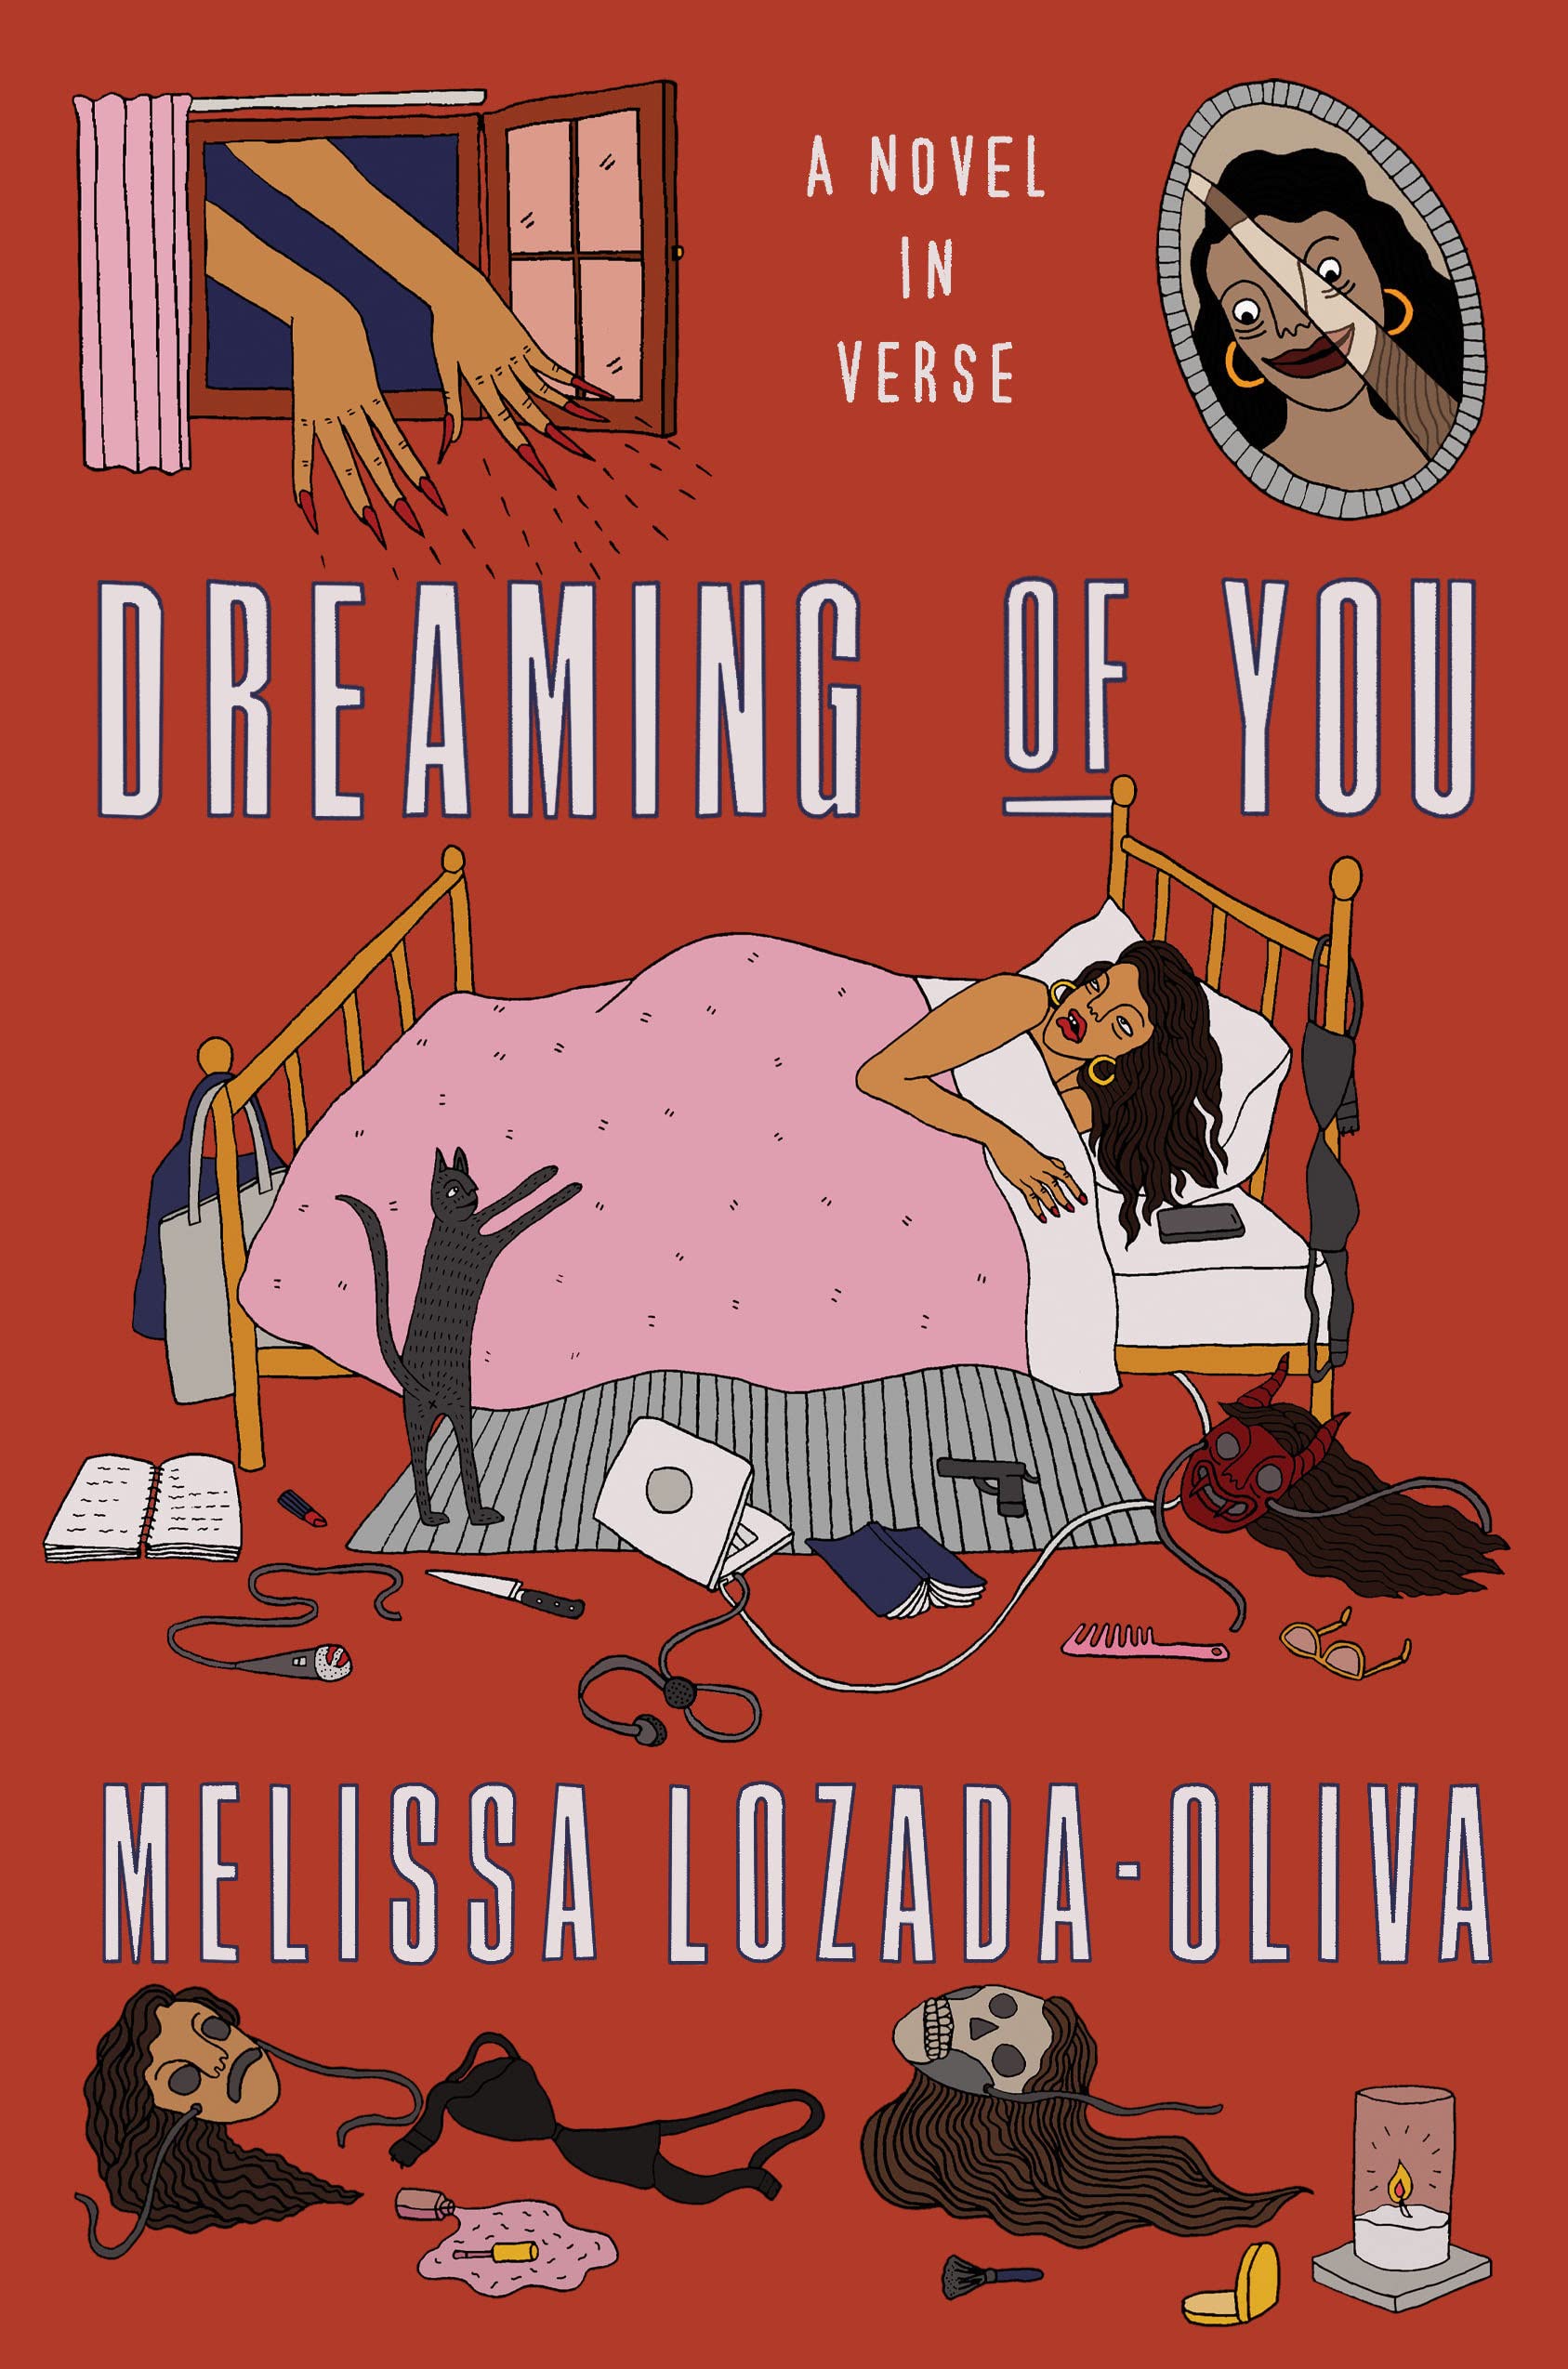 Dreaming of You: A Novel in Verse (Hardcover)